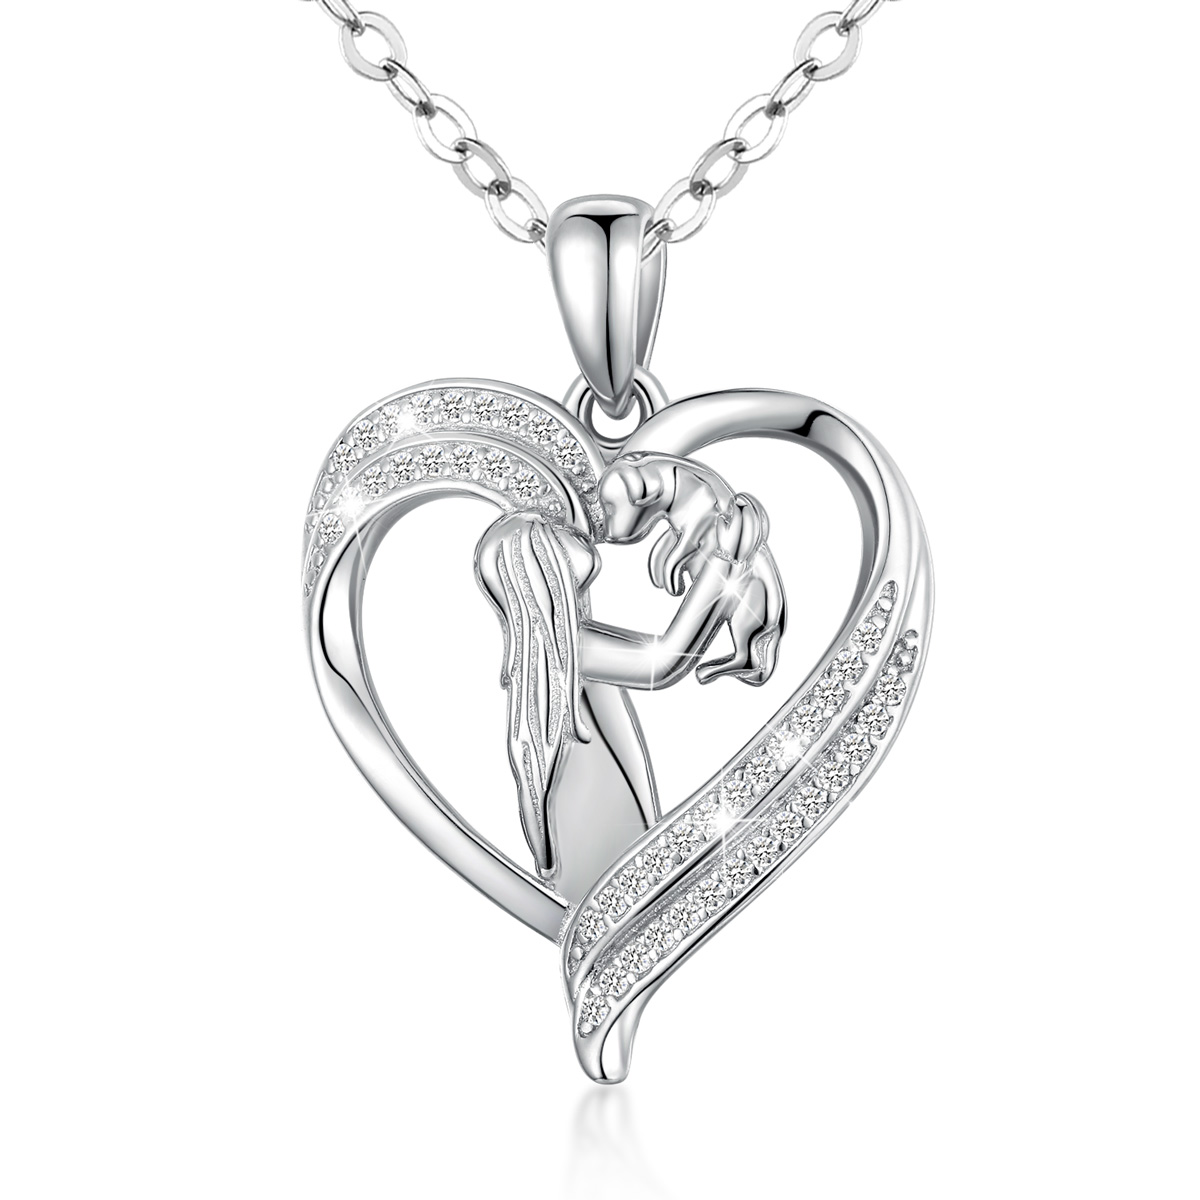 S925 Sterling Silver Rhodium Plated Girl And Dog Pattern CZ Diamond Heart Shape Pendant Necklace